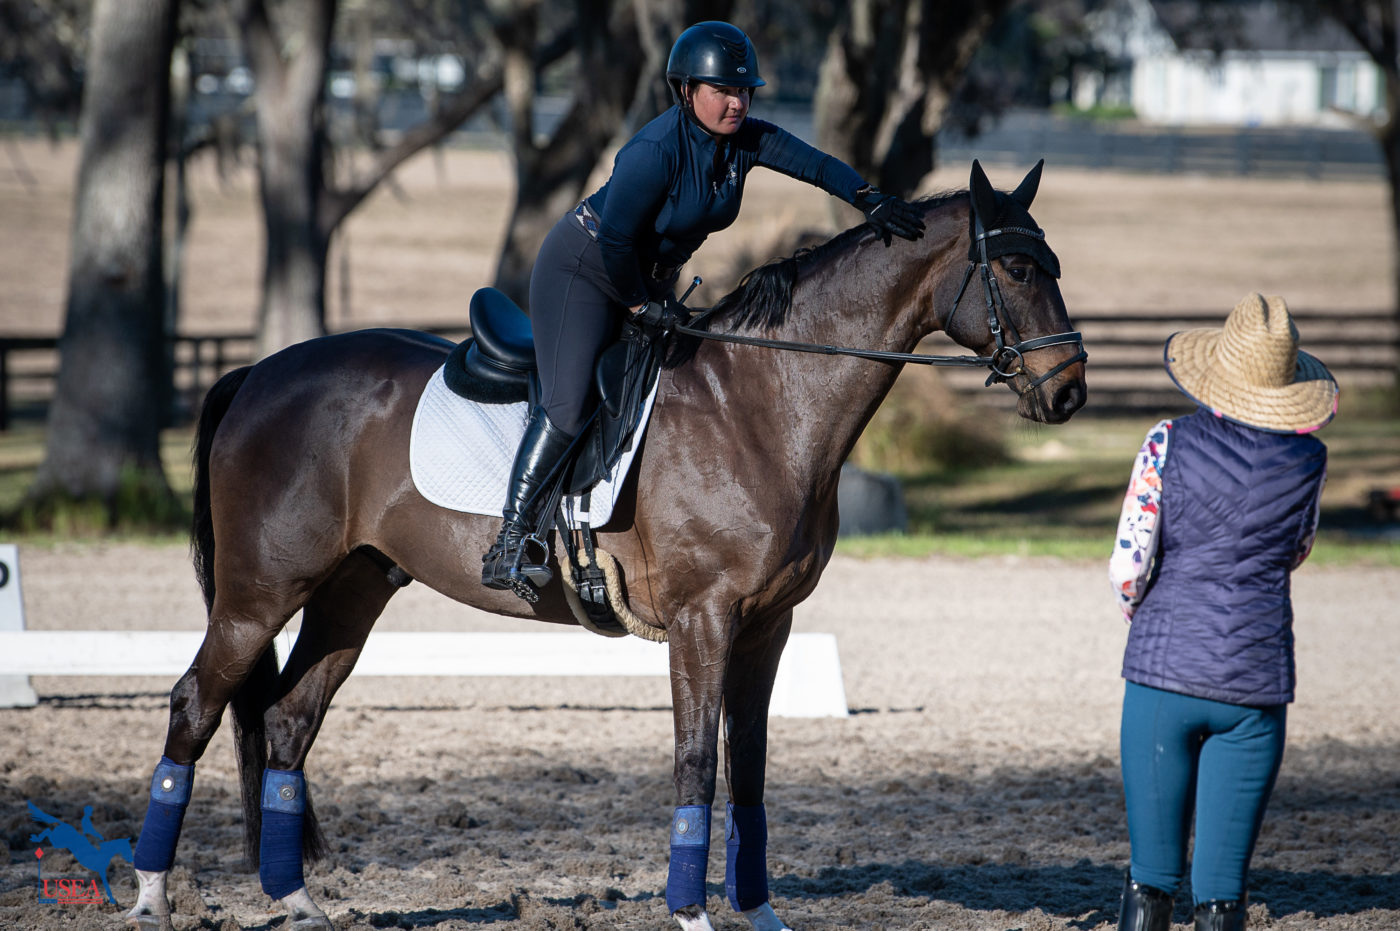 Connor Geisselman gives her horse a pat after the Modified lesson. USEA/ Meagan DeLisle photo.